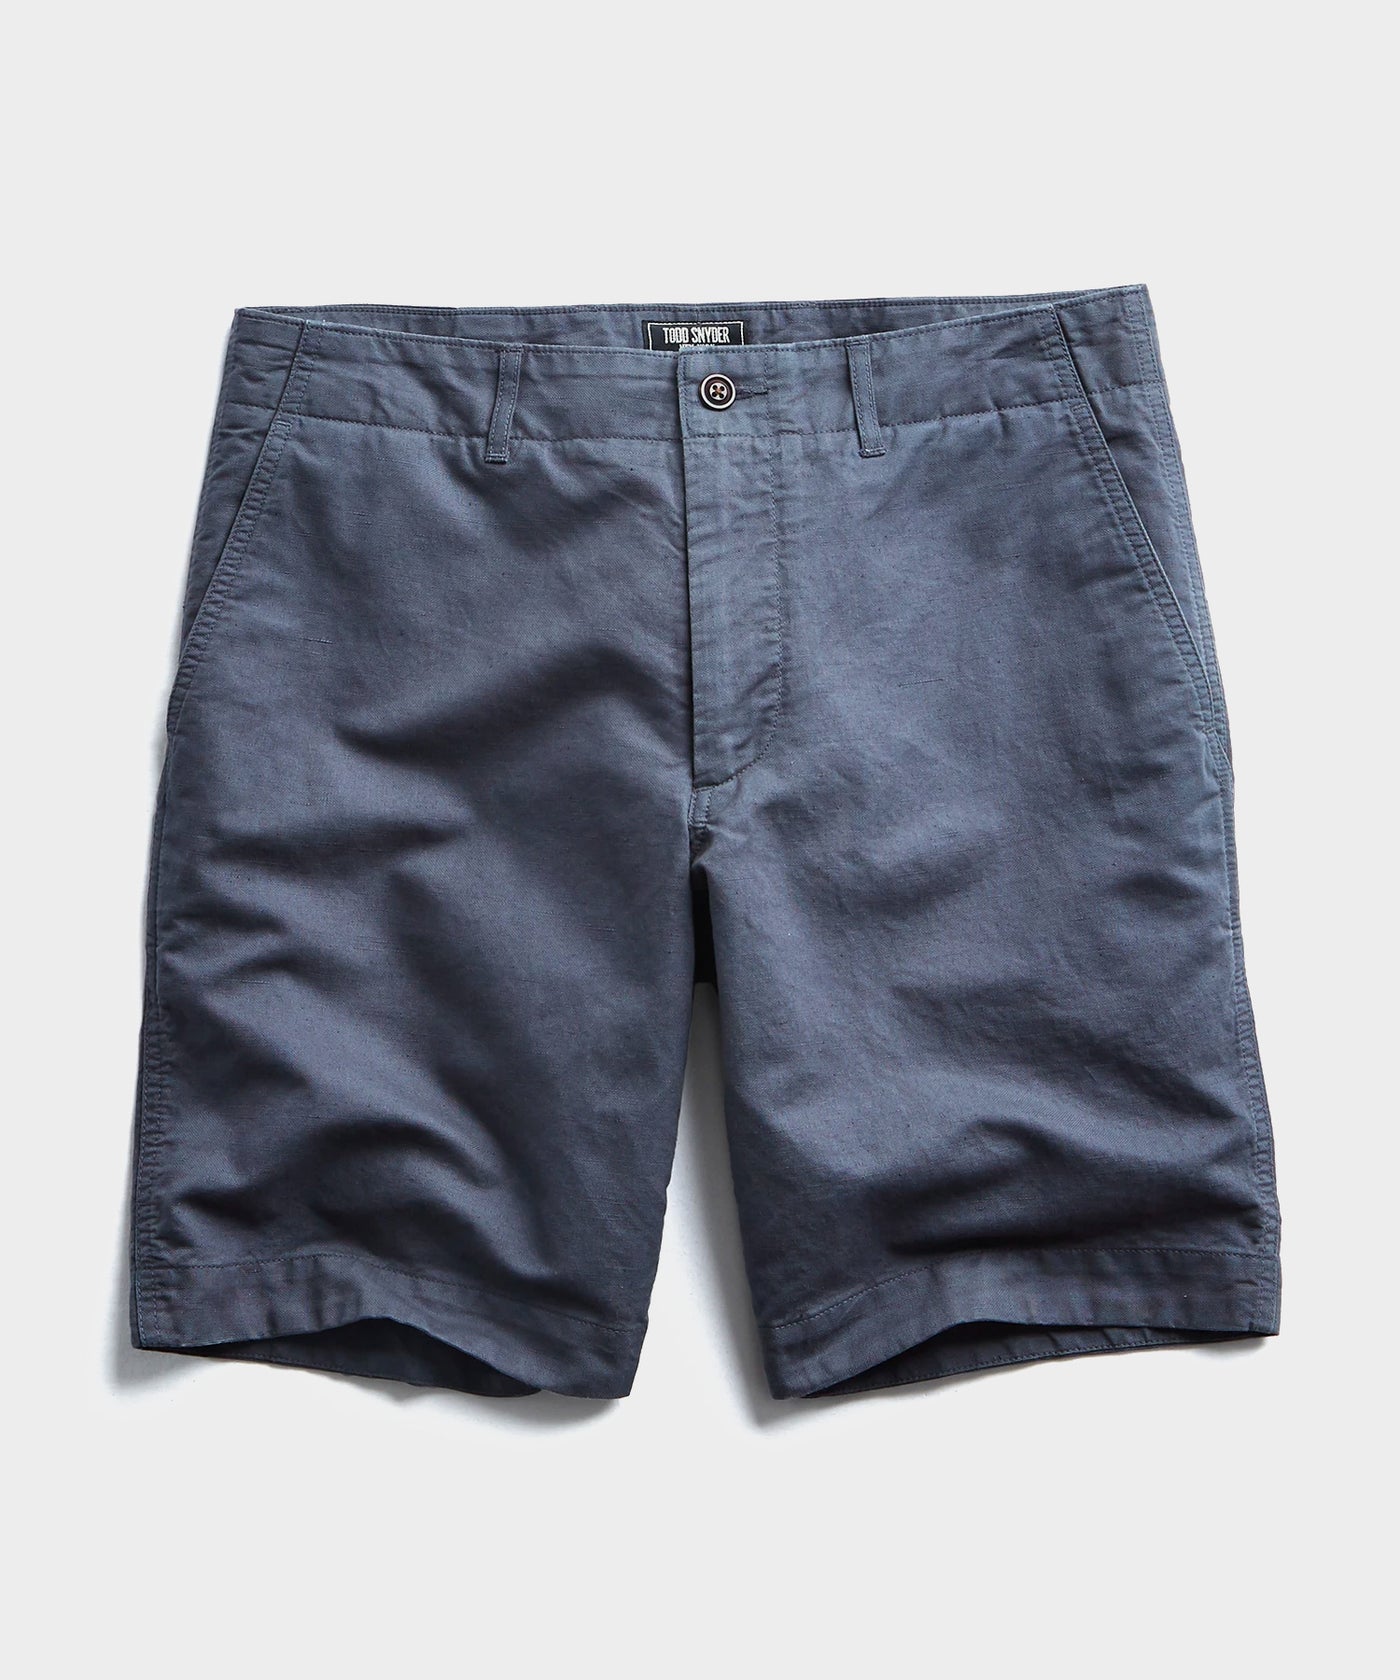 Shorts on Sale - Todd Snyder